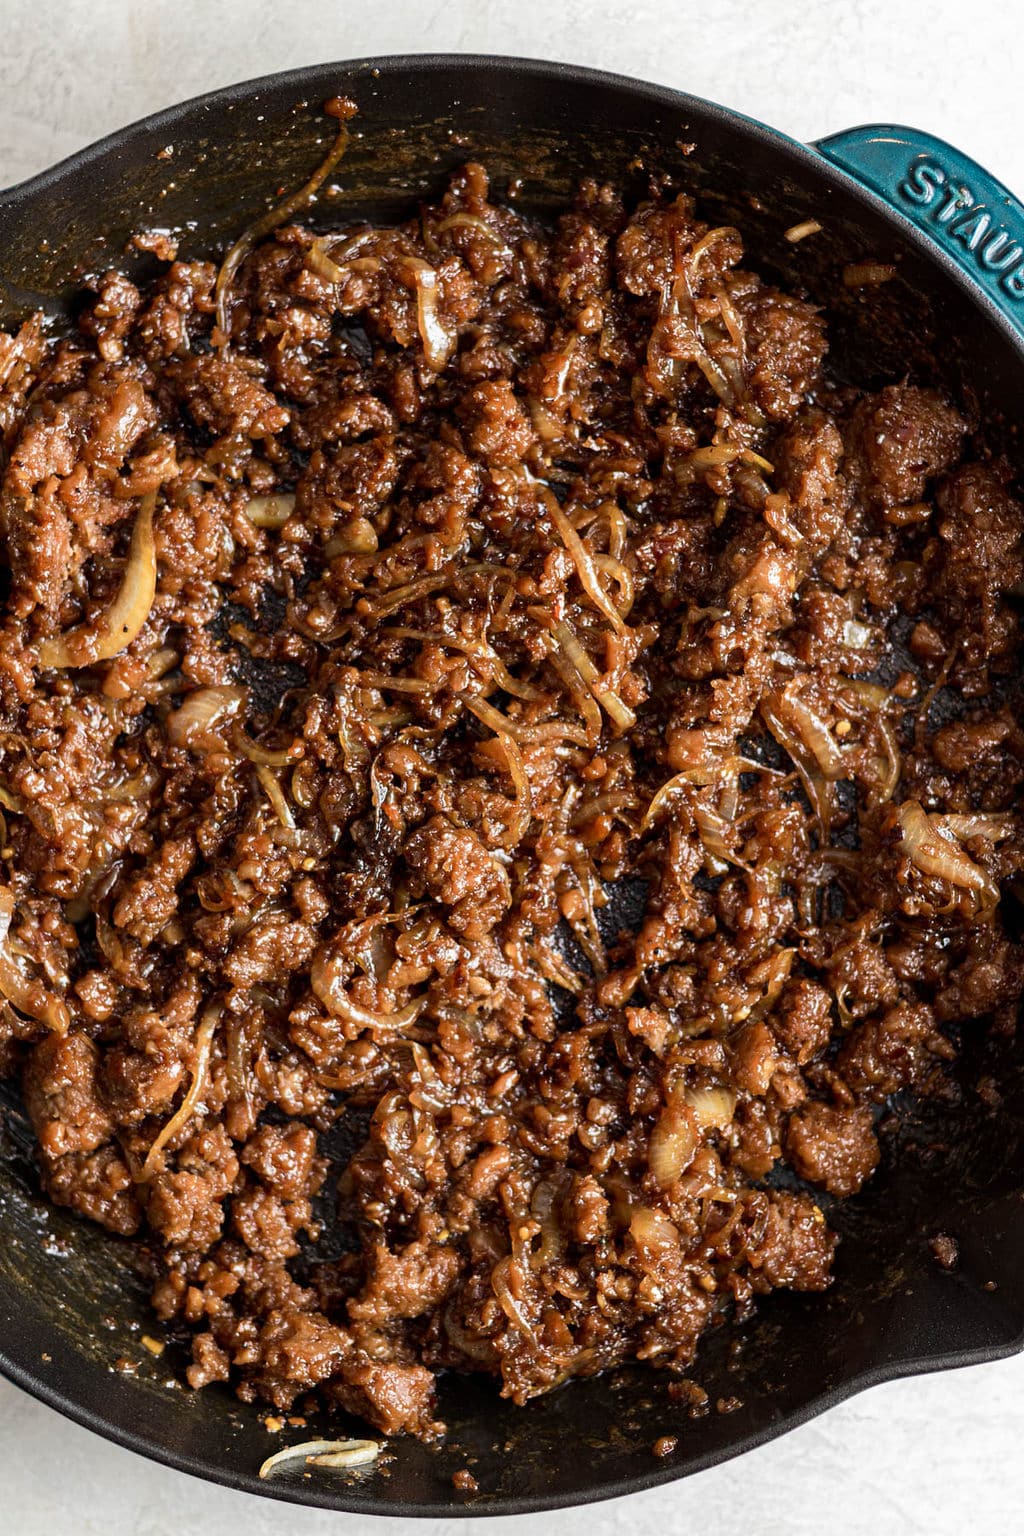 cooked vegan ground beef and onions in a black skillet.